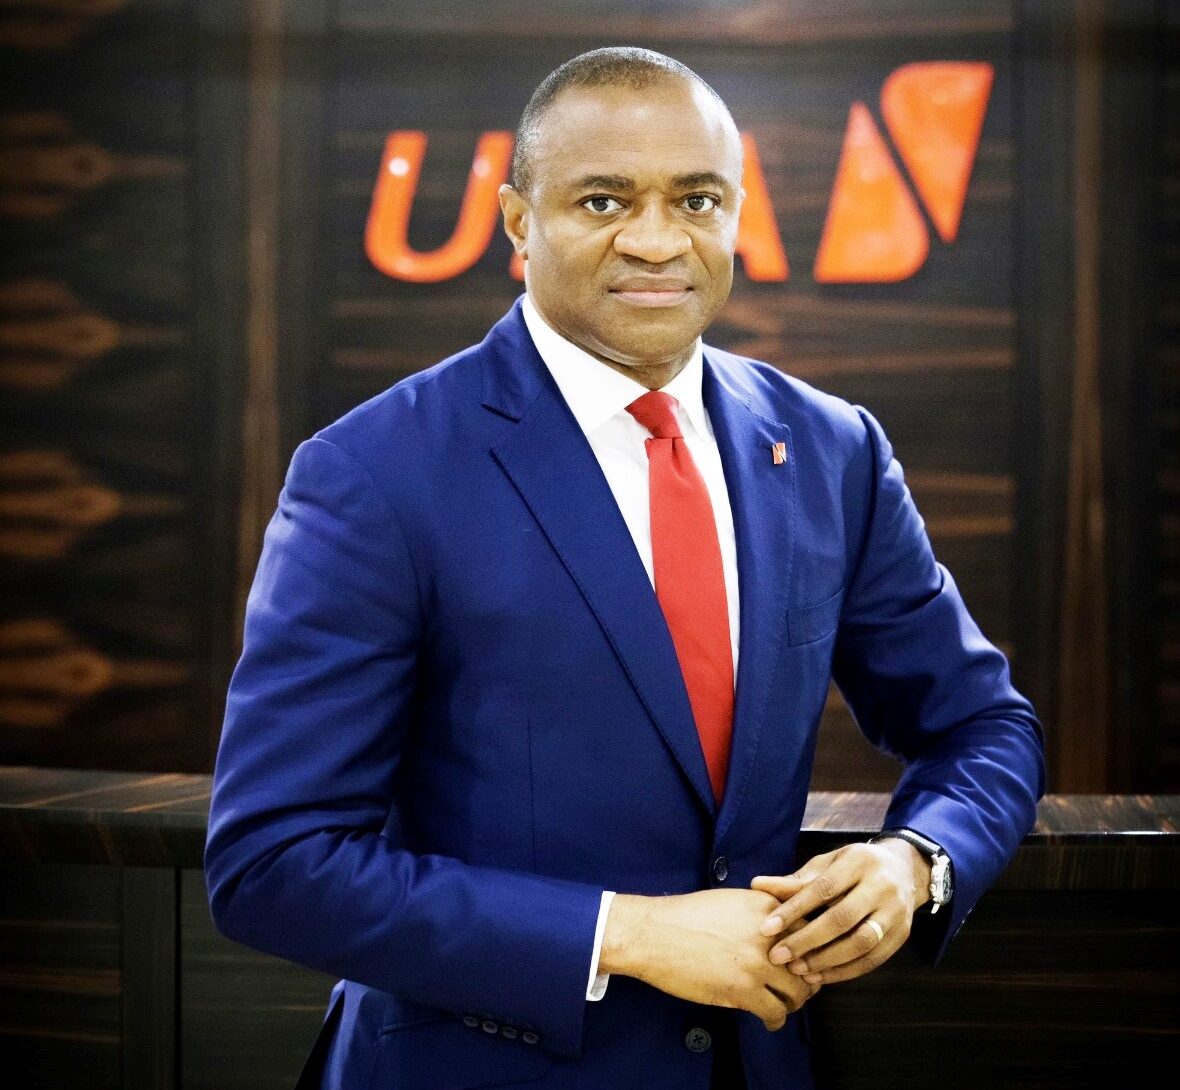 Full Year 2022: UBA Delivers Strong Results as Profit Hits $446.4m  …Declares 0.2 cents Final Dividend … Total assets Rise by 21.6 percent, Close at $23.6 billion